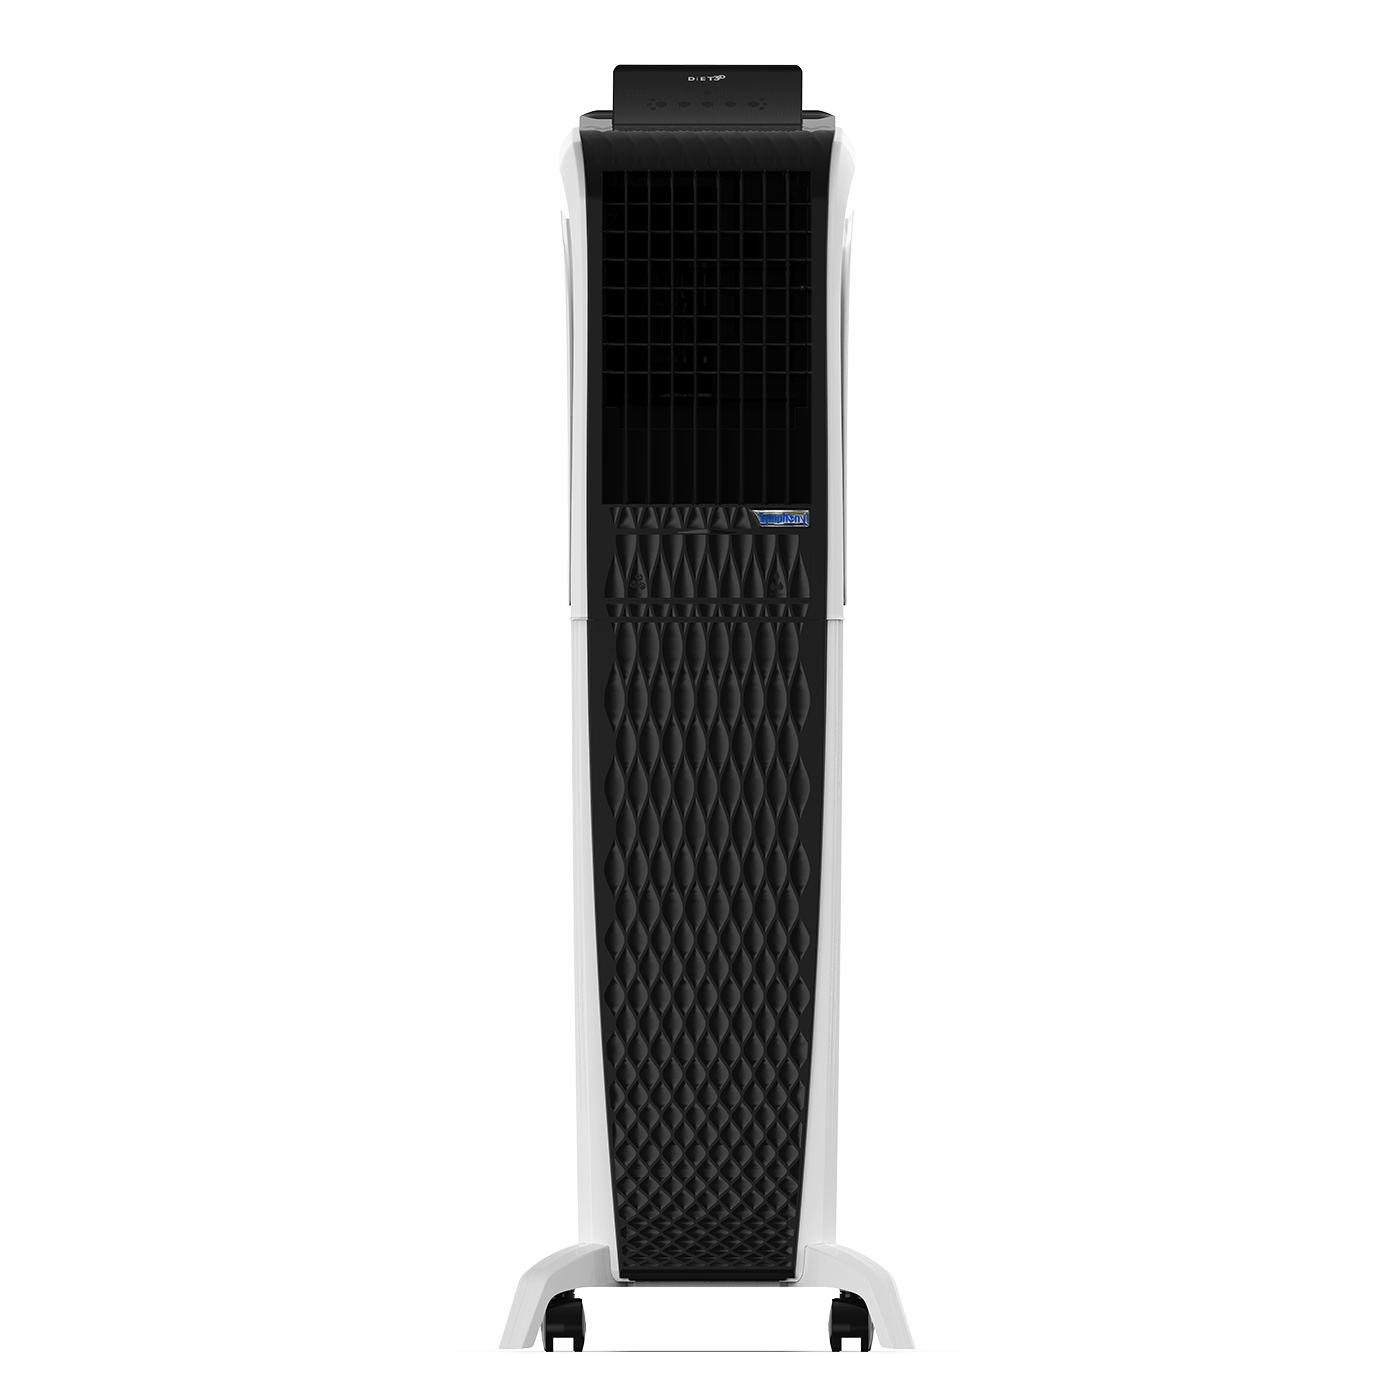 Image of a Honeywell 30Ltr Portable Evaporative Air Cooler on a white background